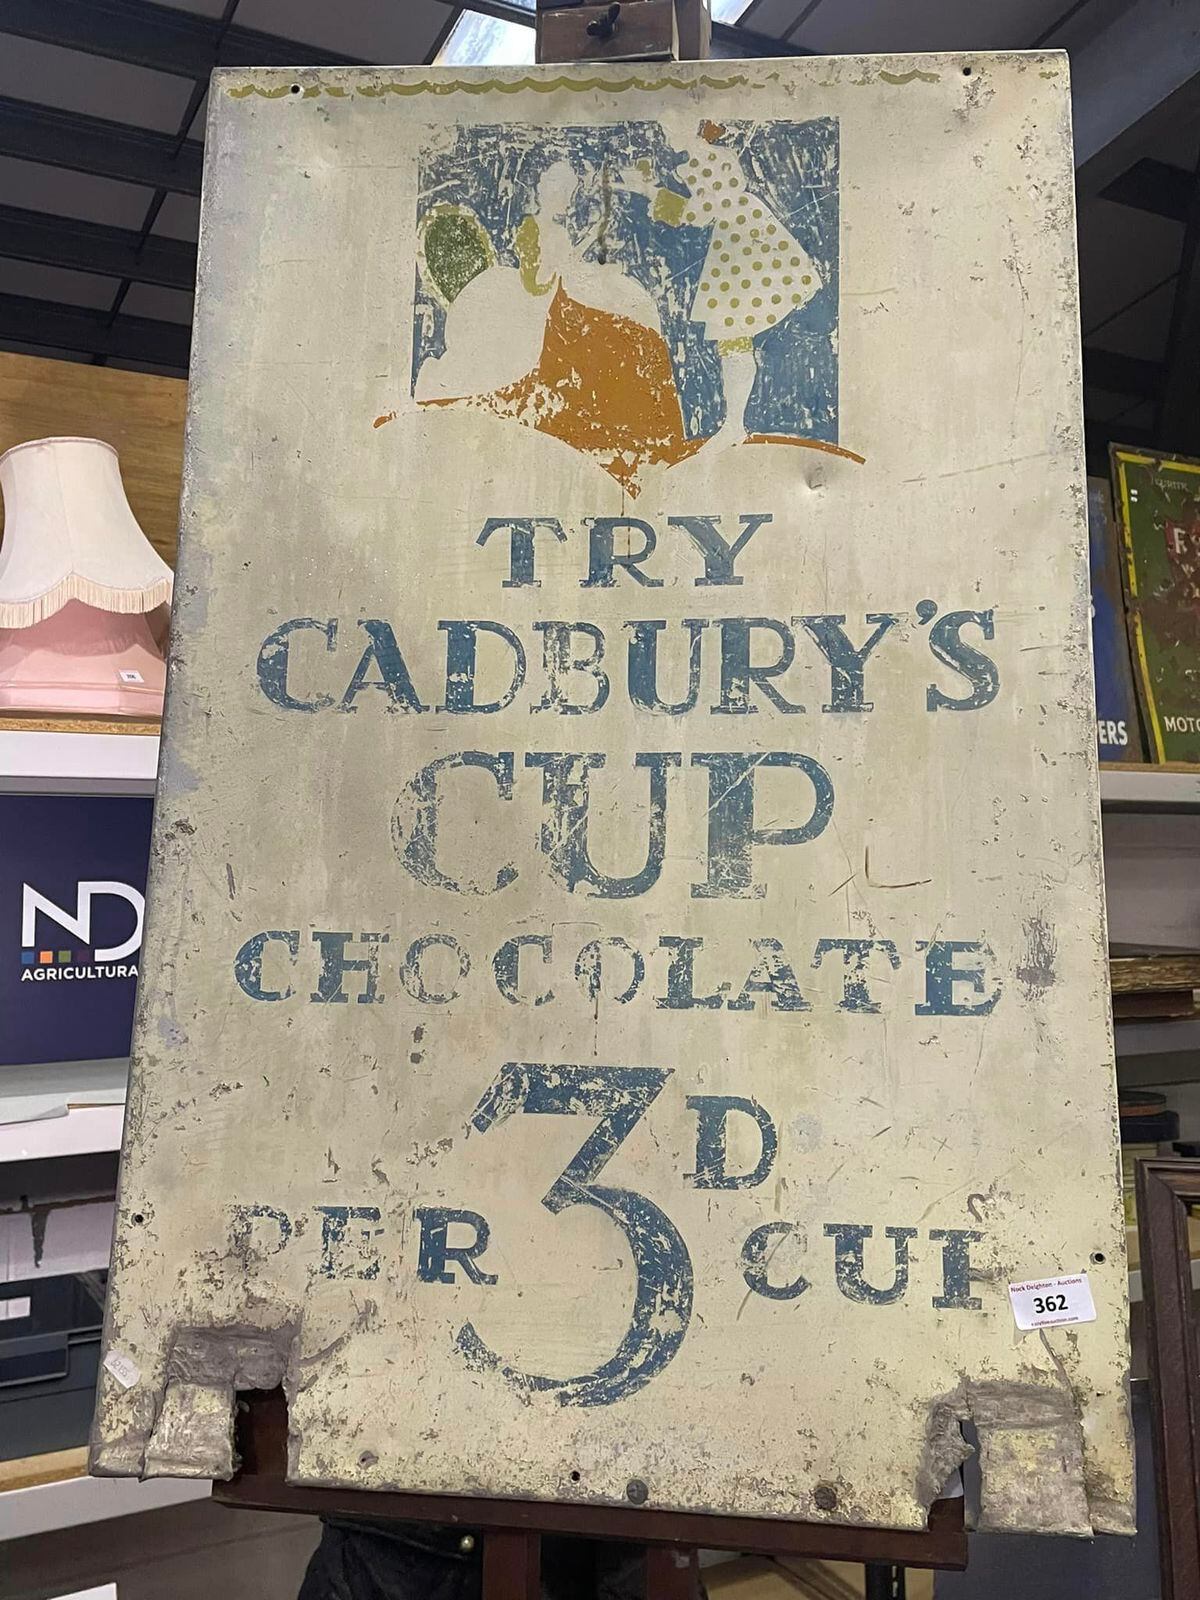 The Cadbury items will be sold at auction on Wednesday. Photo: Nock Deighton.